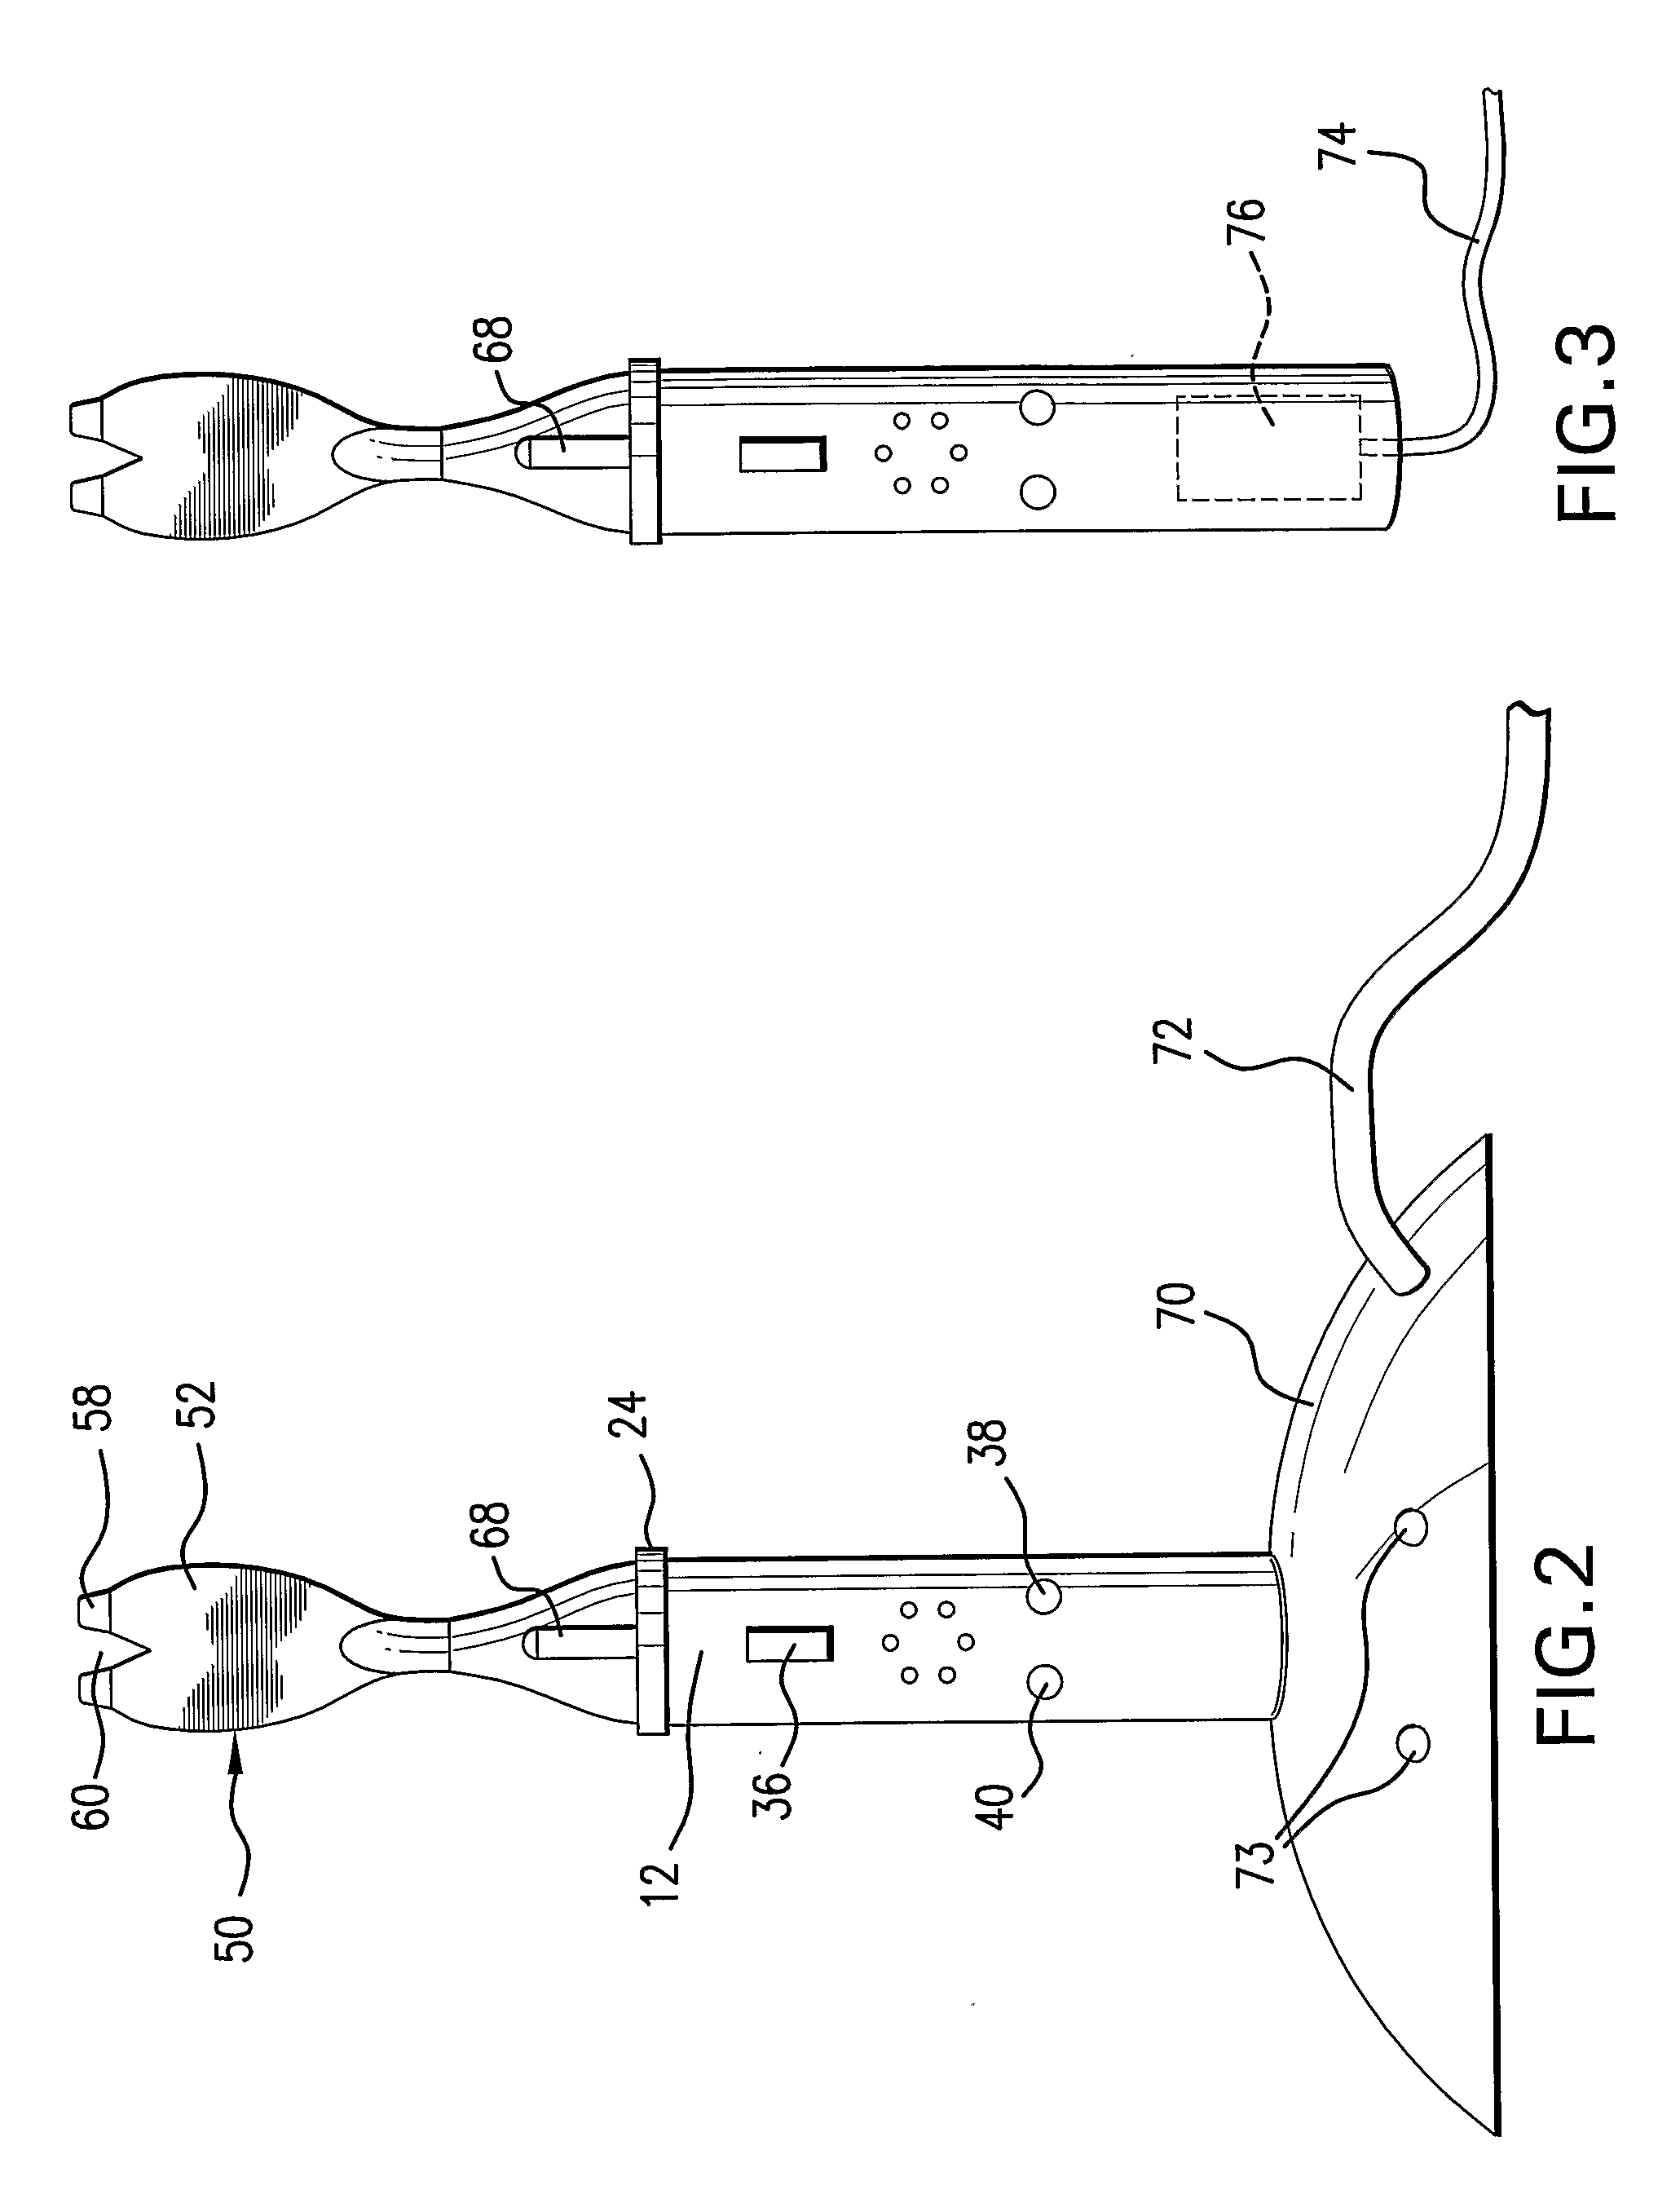 Apparatus and Method for Reducing Pain During Skin Puncturing Procedures